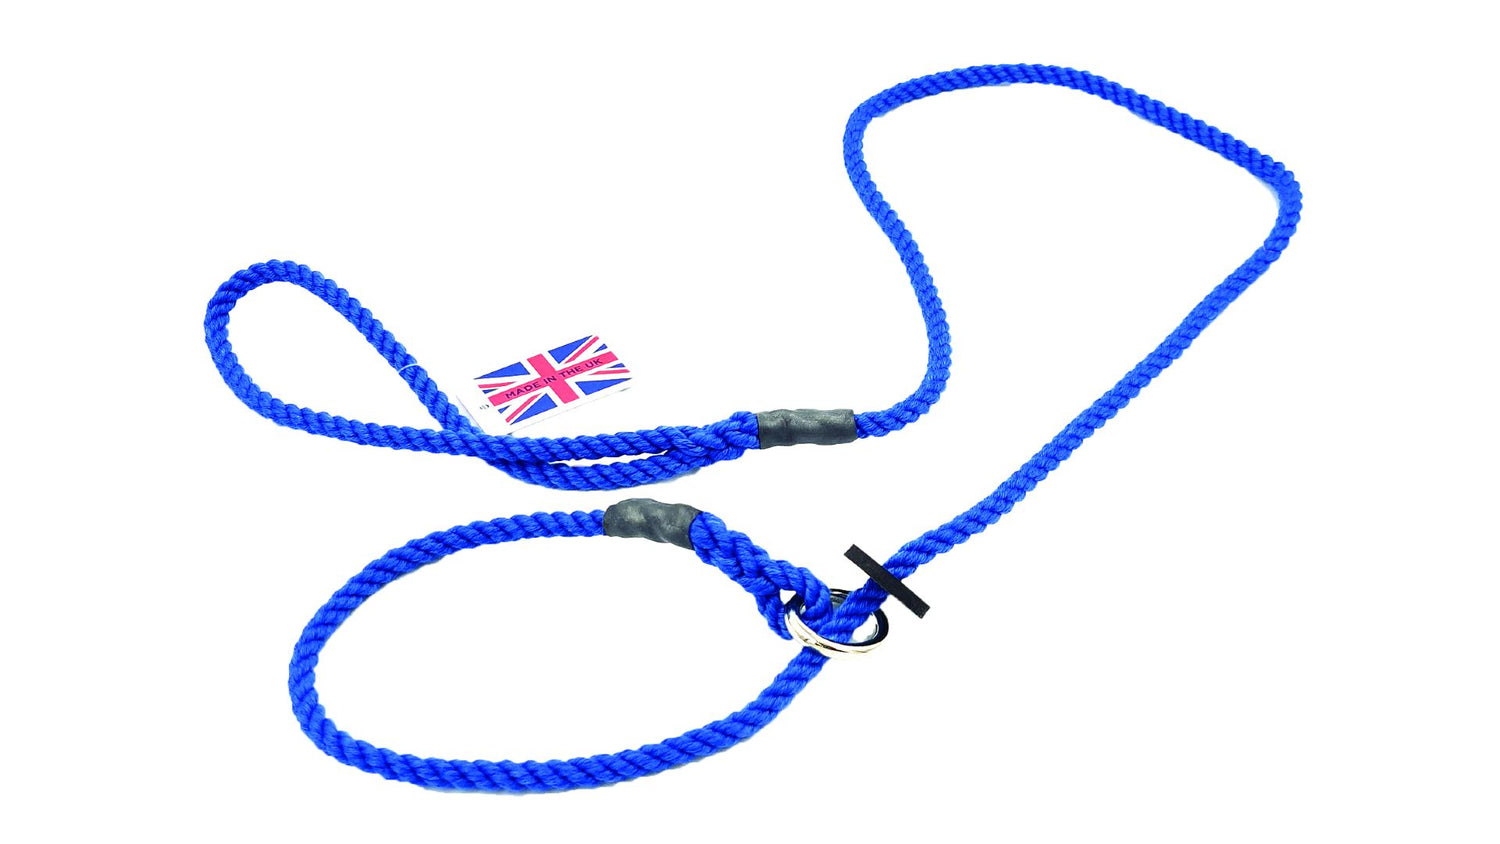 Bisley Deluxe Slip Lead with Rubber Stop in Blue